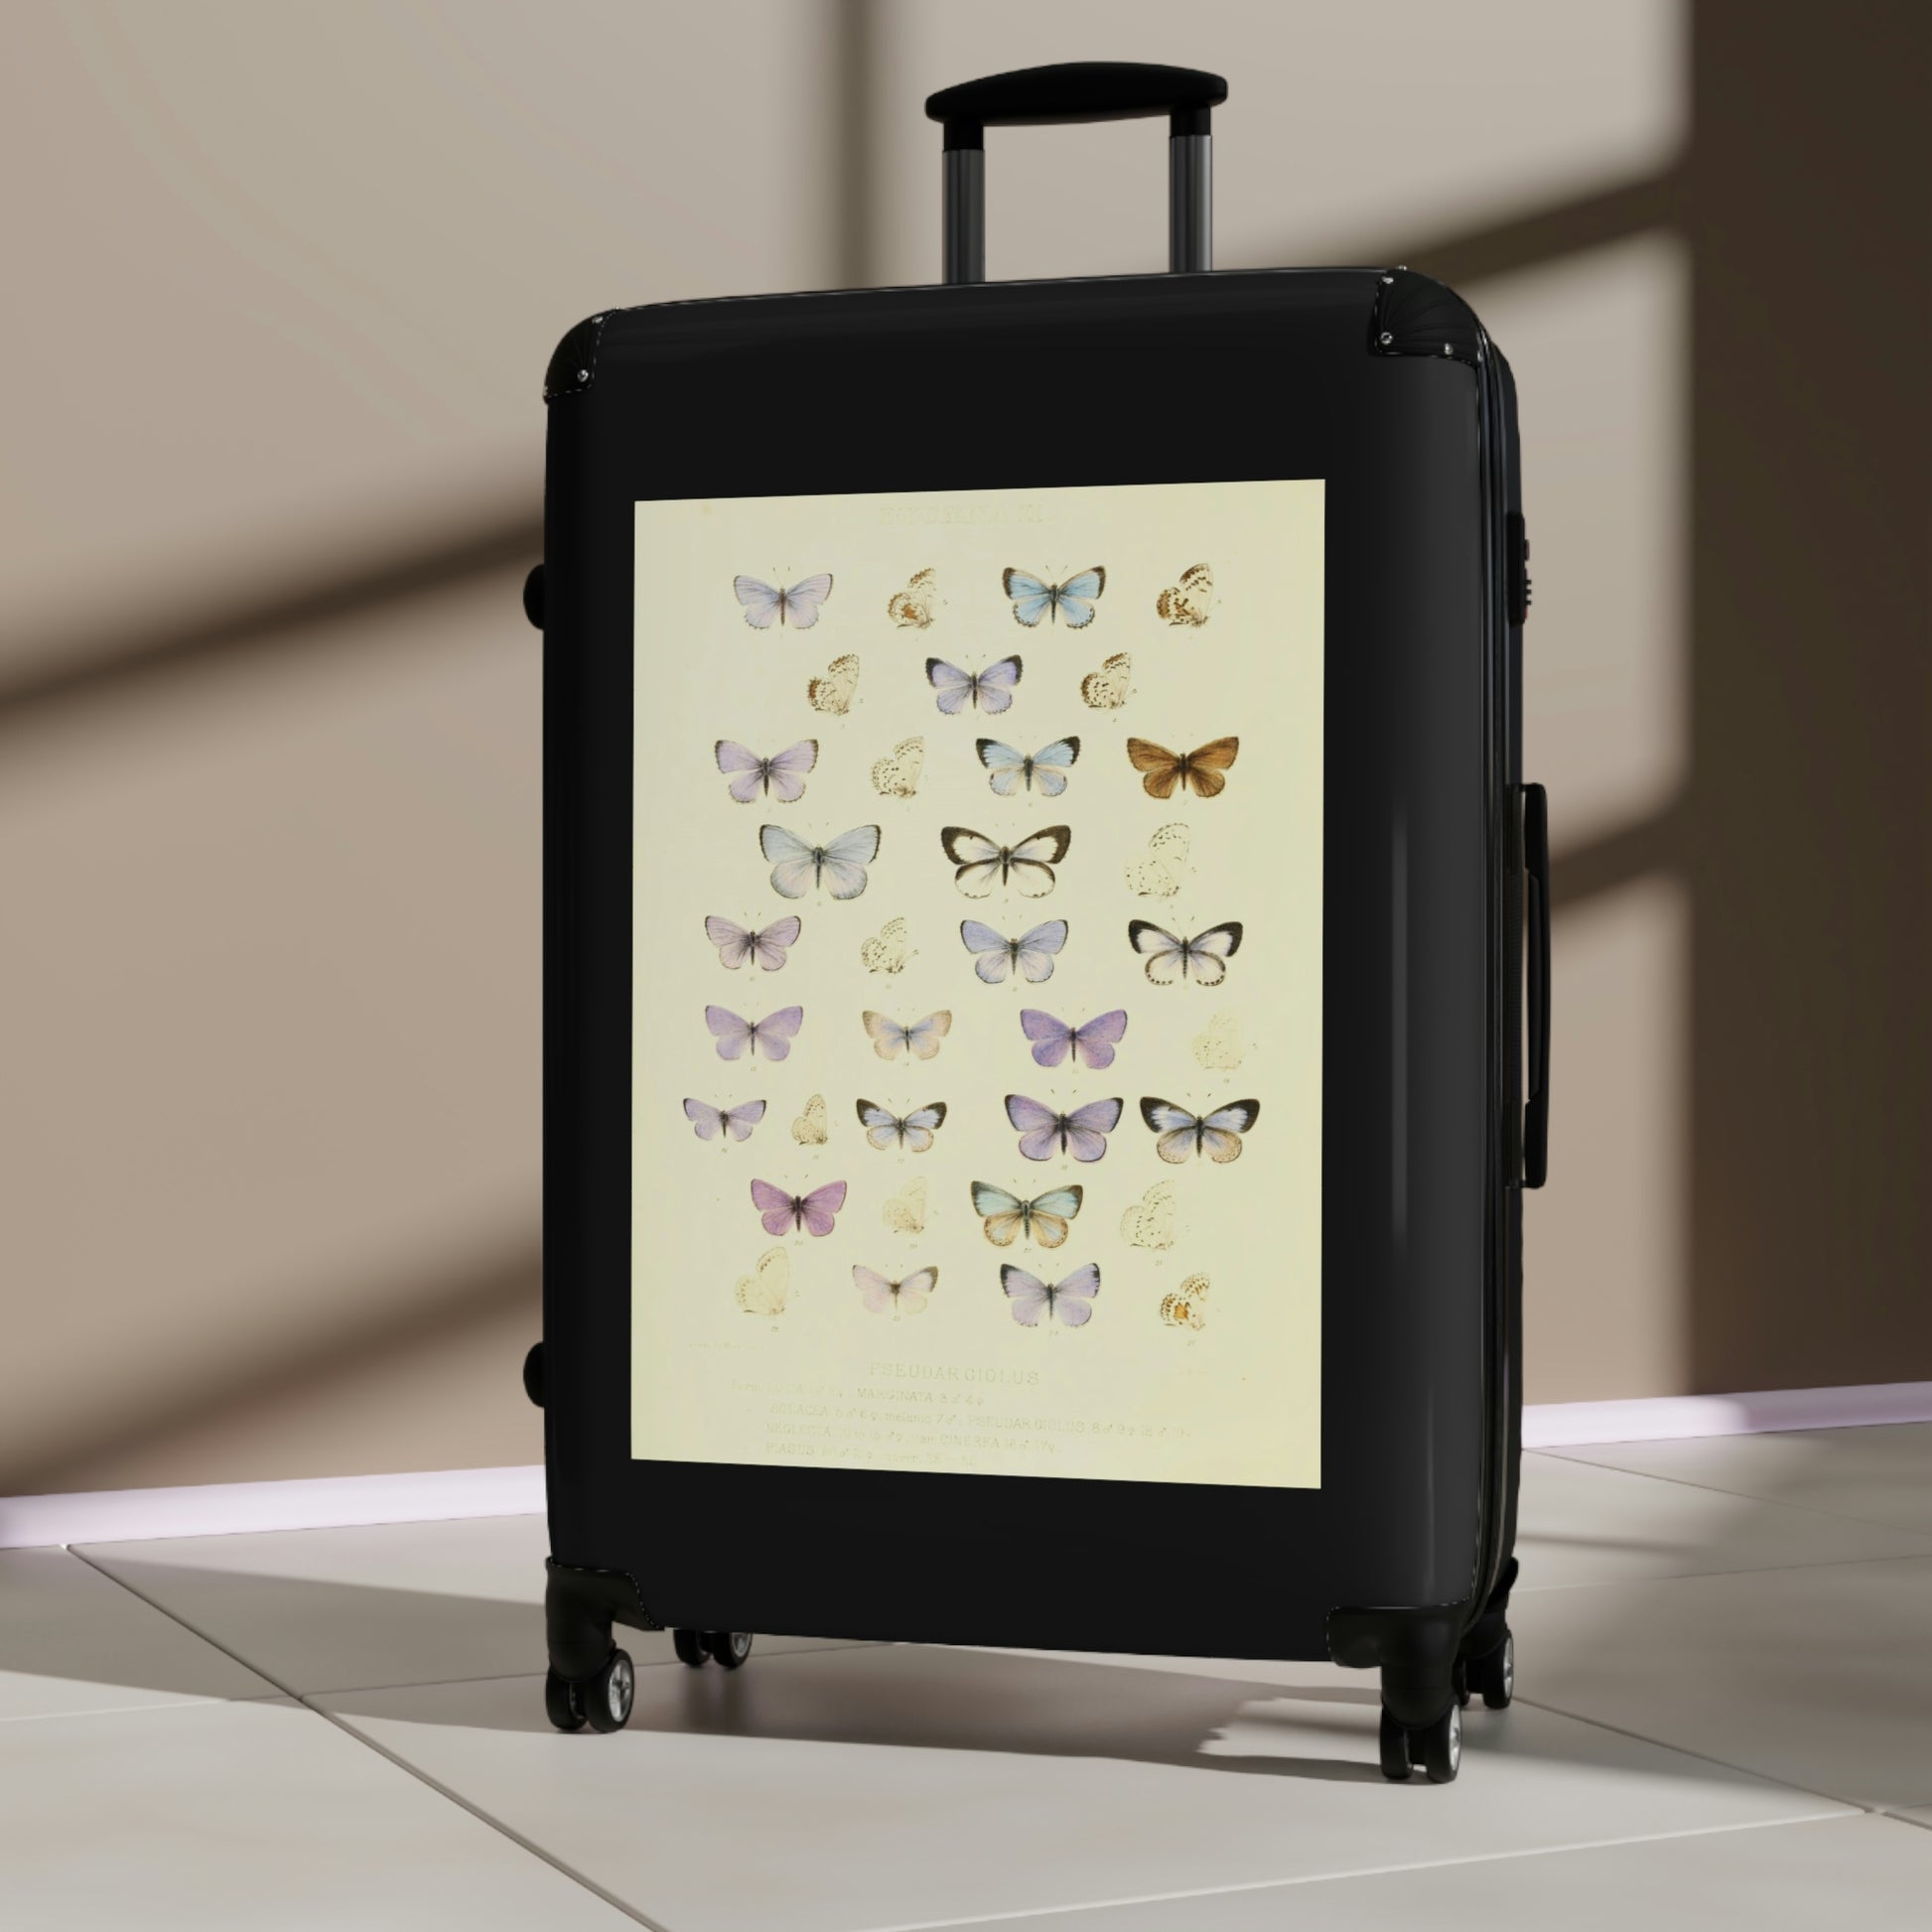 Getrott Butterflies of North America Lycæna Pseudargiolus Lucia Marginata Violocea Pseudar Giolus Neglecta Cinerea Piasus Aberr Cabin Suitcase Carry-On Travel Check Luggage 4-Wheel Spinner Suitcase Bag Multiple Colors and Sizes